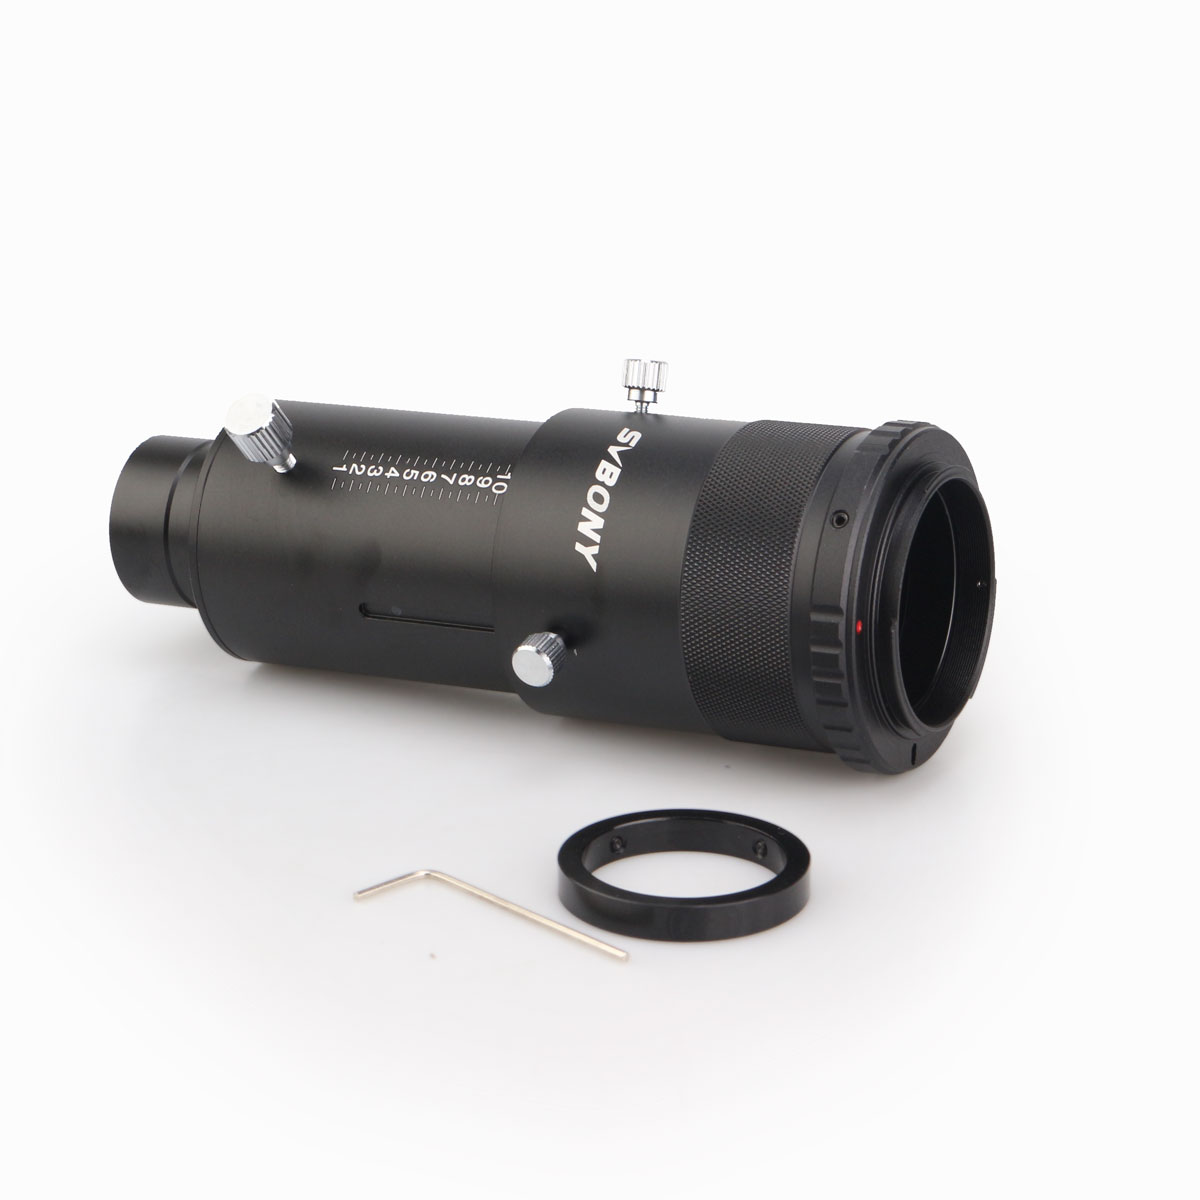 SVBONY-SV112-125quot-Fully-Metal-Deluxe-Variable-Eyepiece-Projection-Kit-for-Telescopes-with-T-Ring--1842642-5